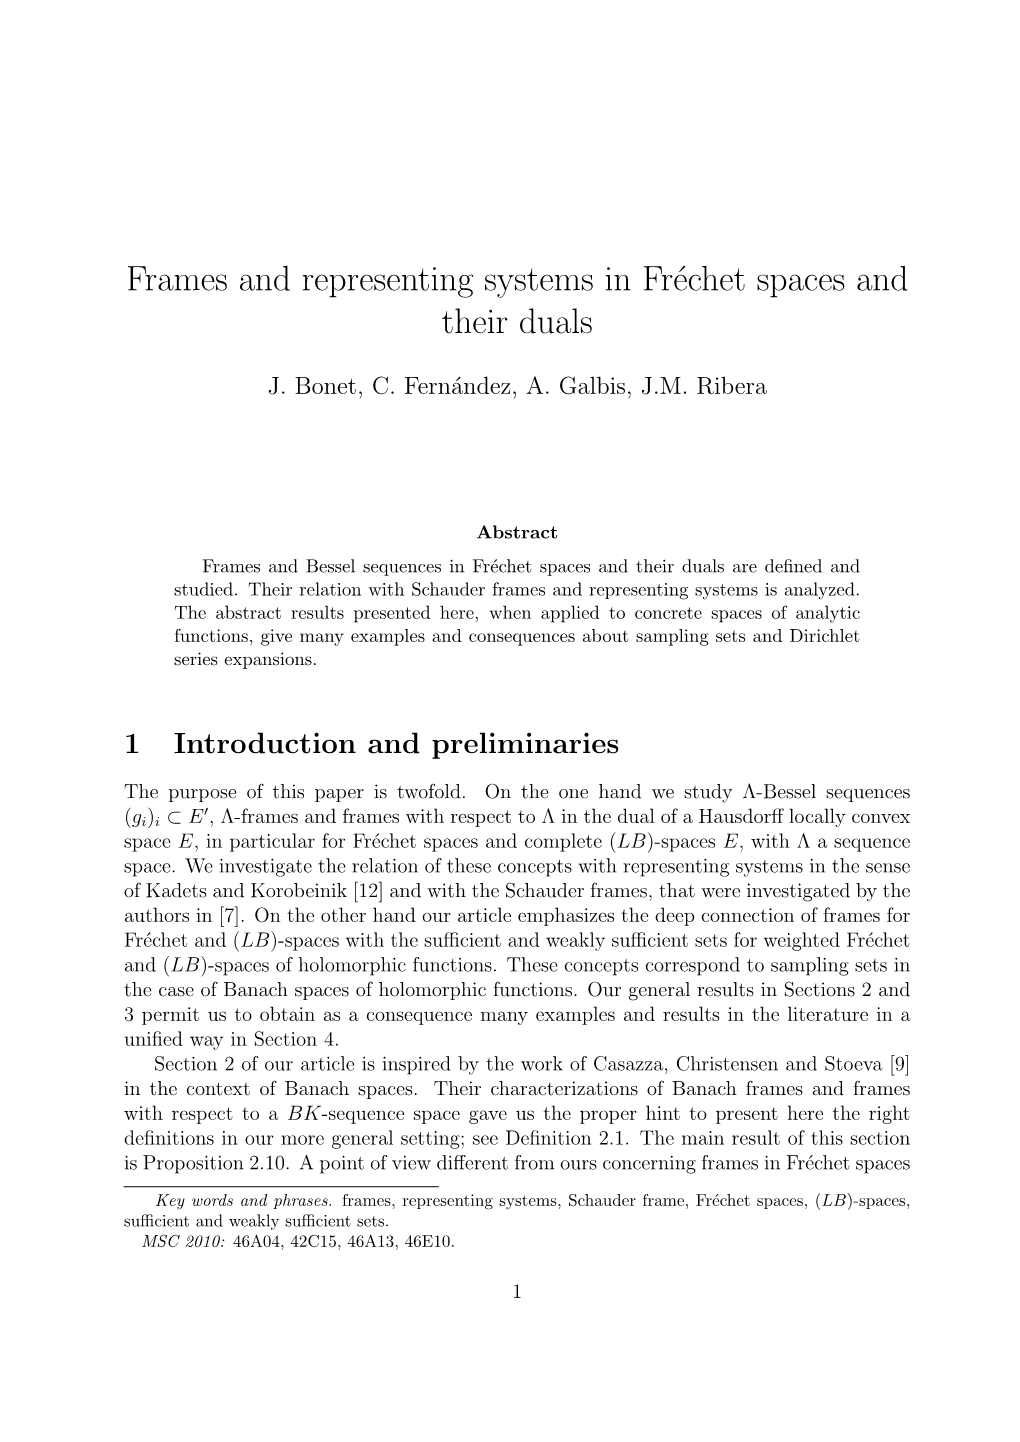 Frames and Representing Systems in Fréchet Spaces and Their Duals